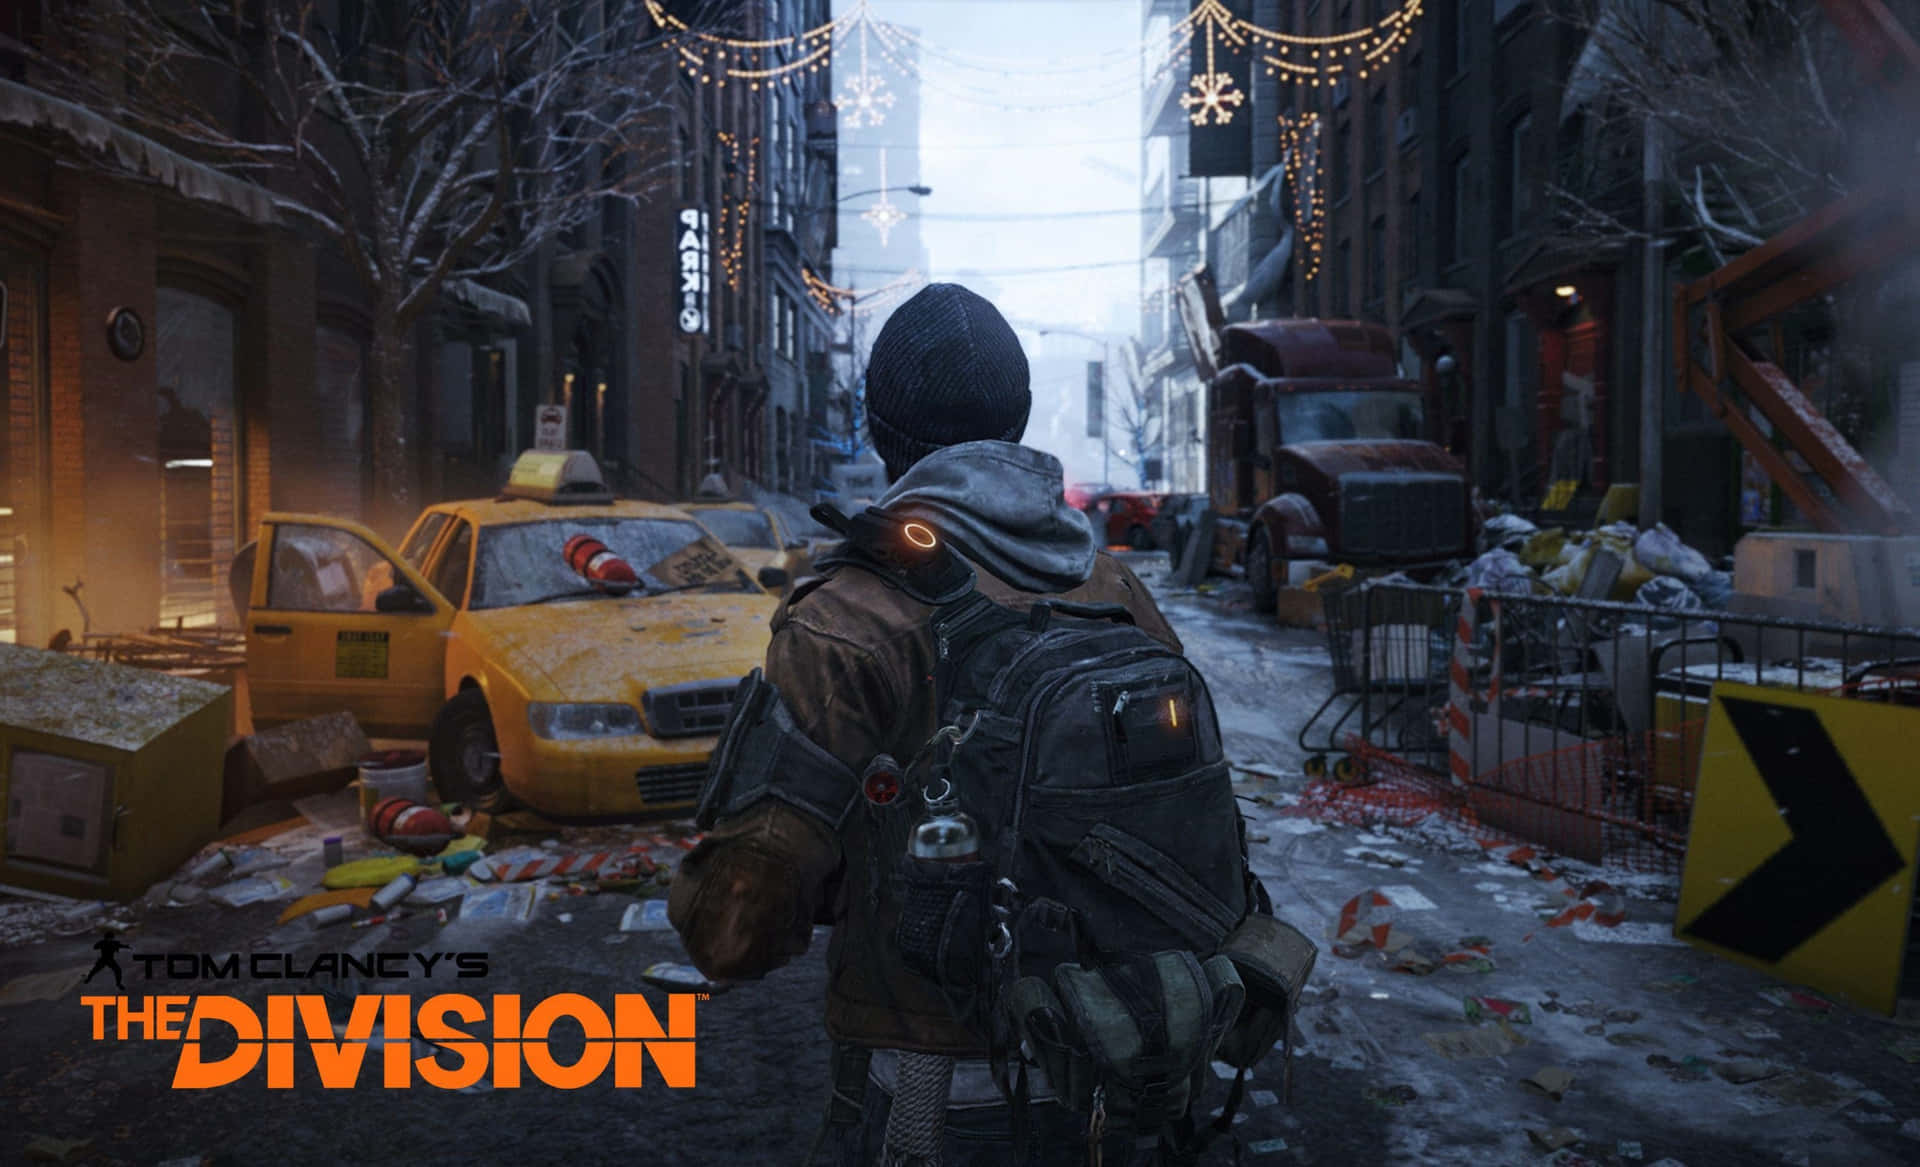 Explore an Open-World Simulation with 'The Division Desktop' Wallpaper